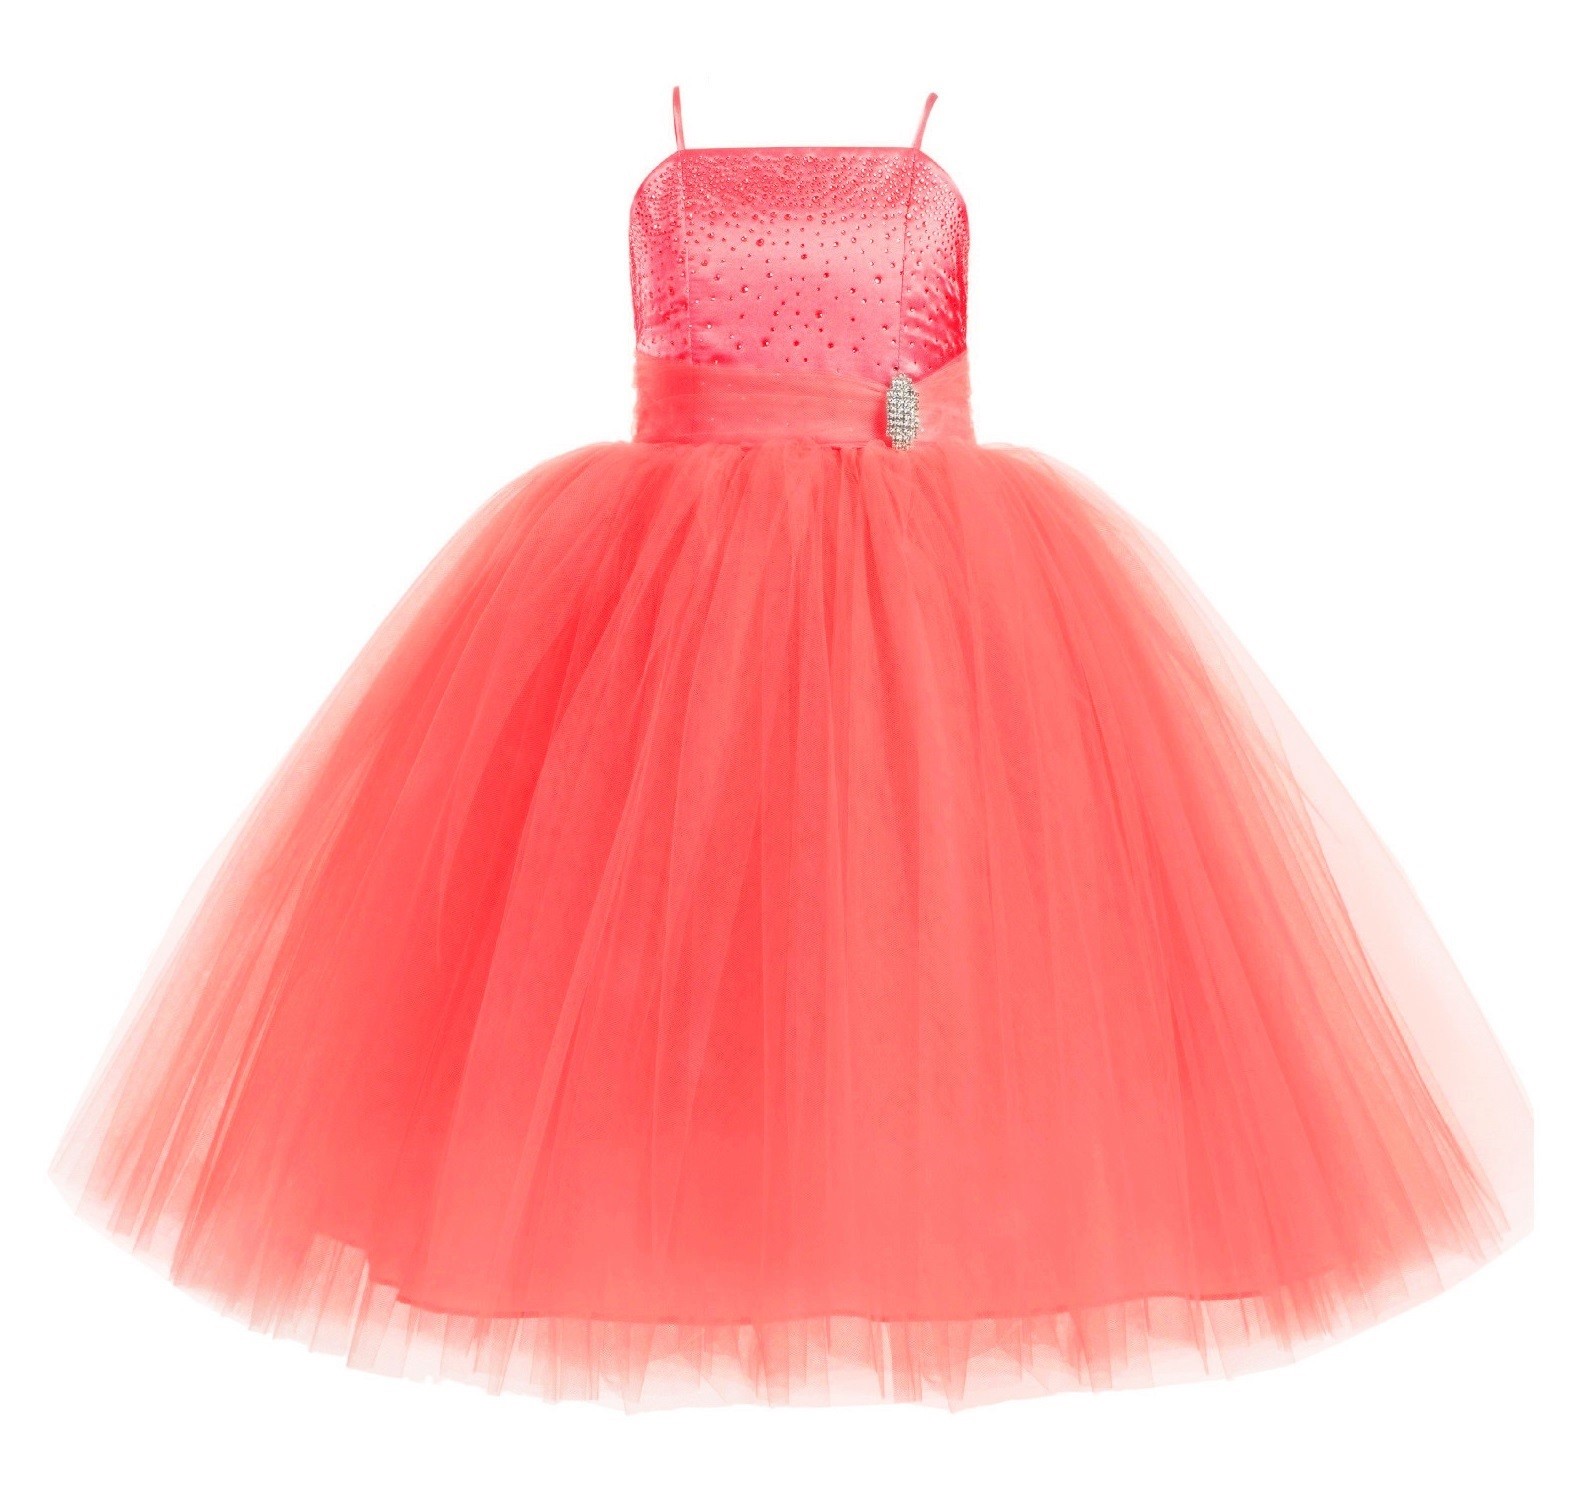 Coral Tulle Rhinestone Tulle Dress Flower Girl Ball Gown 189